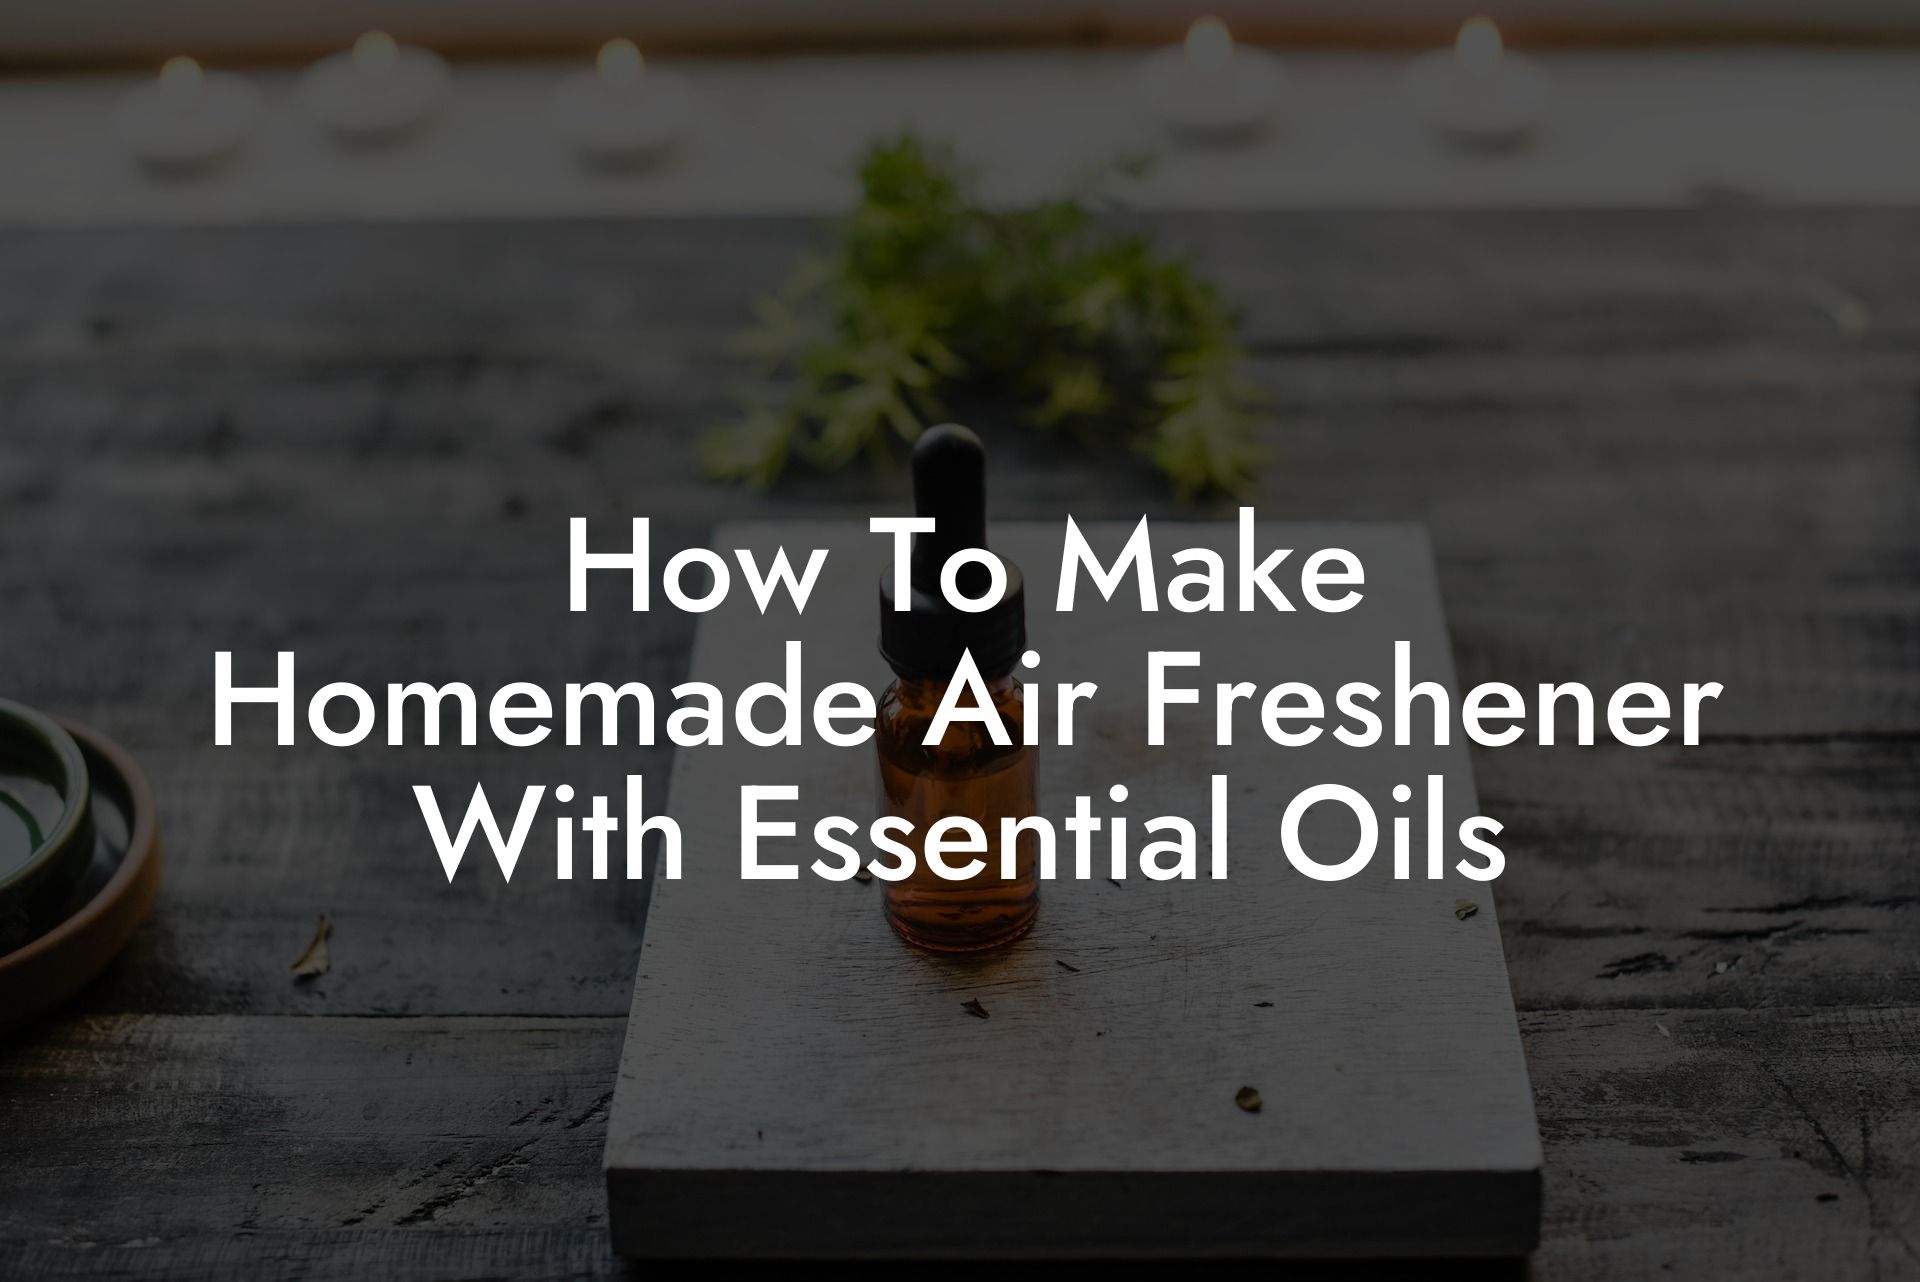 How To Make Homemade Air Freshener With Essential Oils